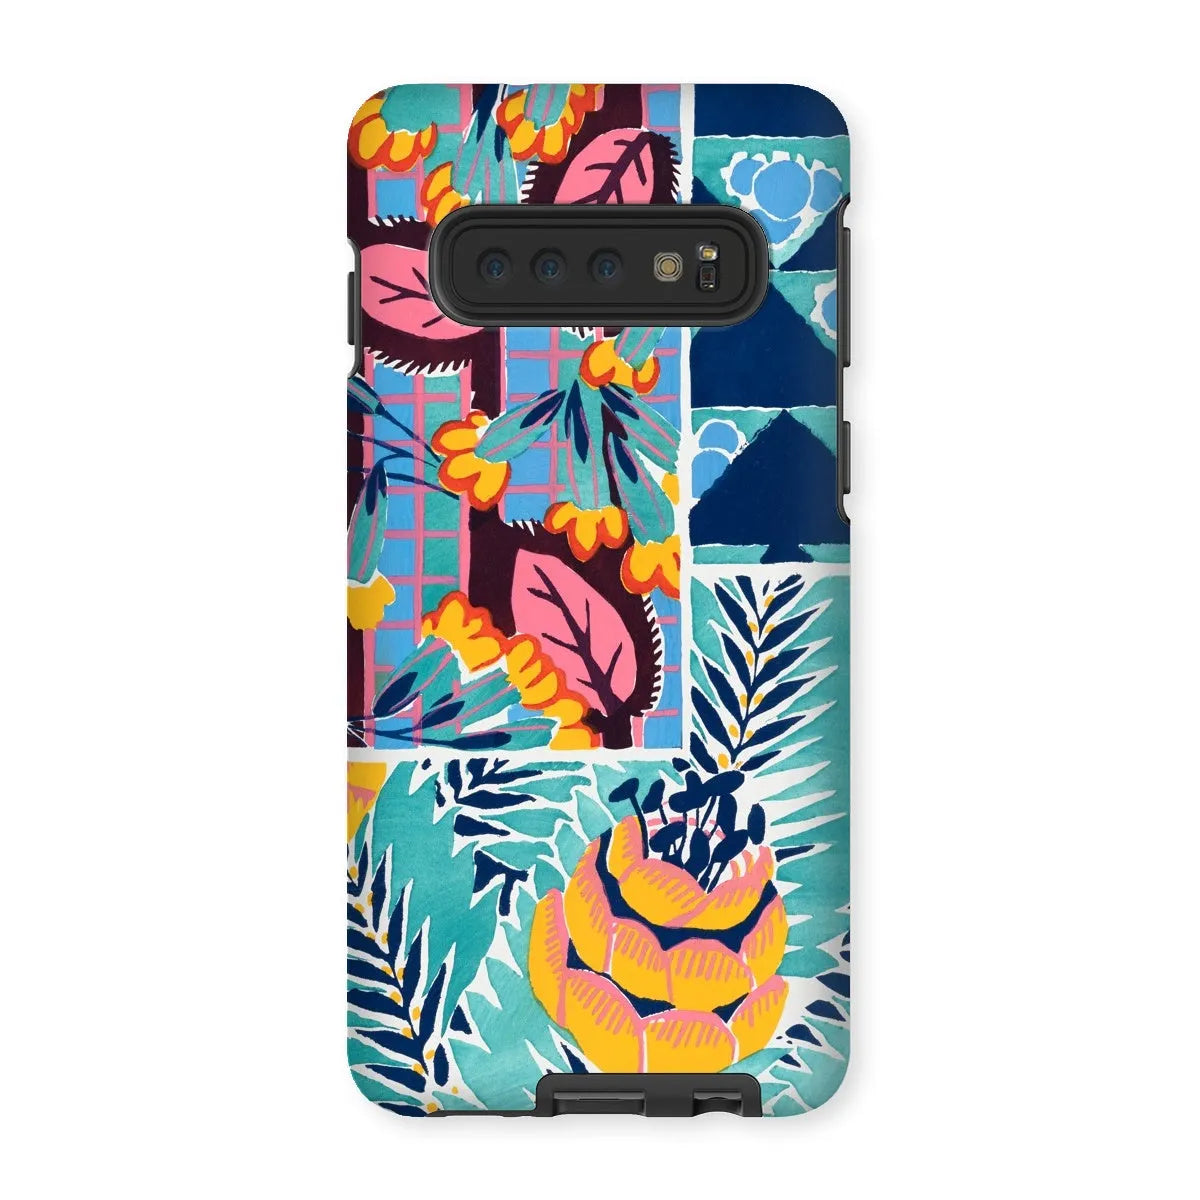 Fabric & Rugs - Pochoir Patterns Phone Case - E. A. Séguy - Samsung Galaxy S10 / Matte - Mobile Phone Cases